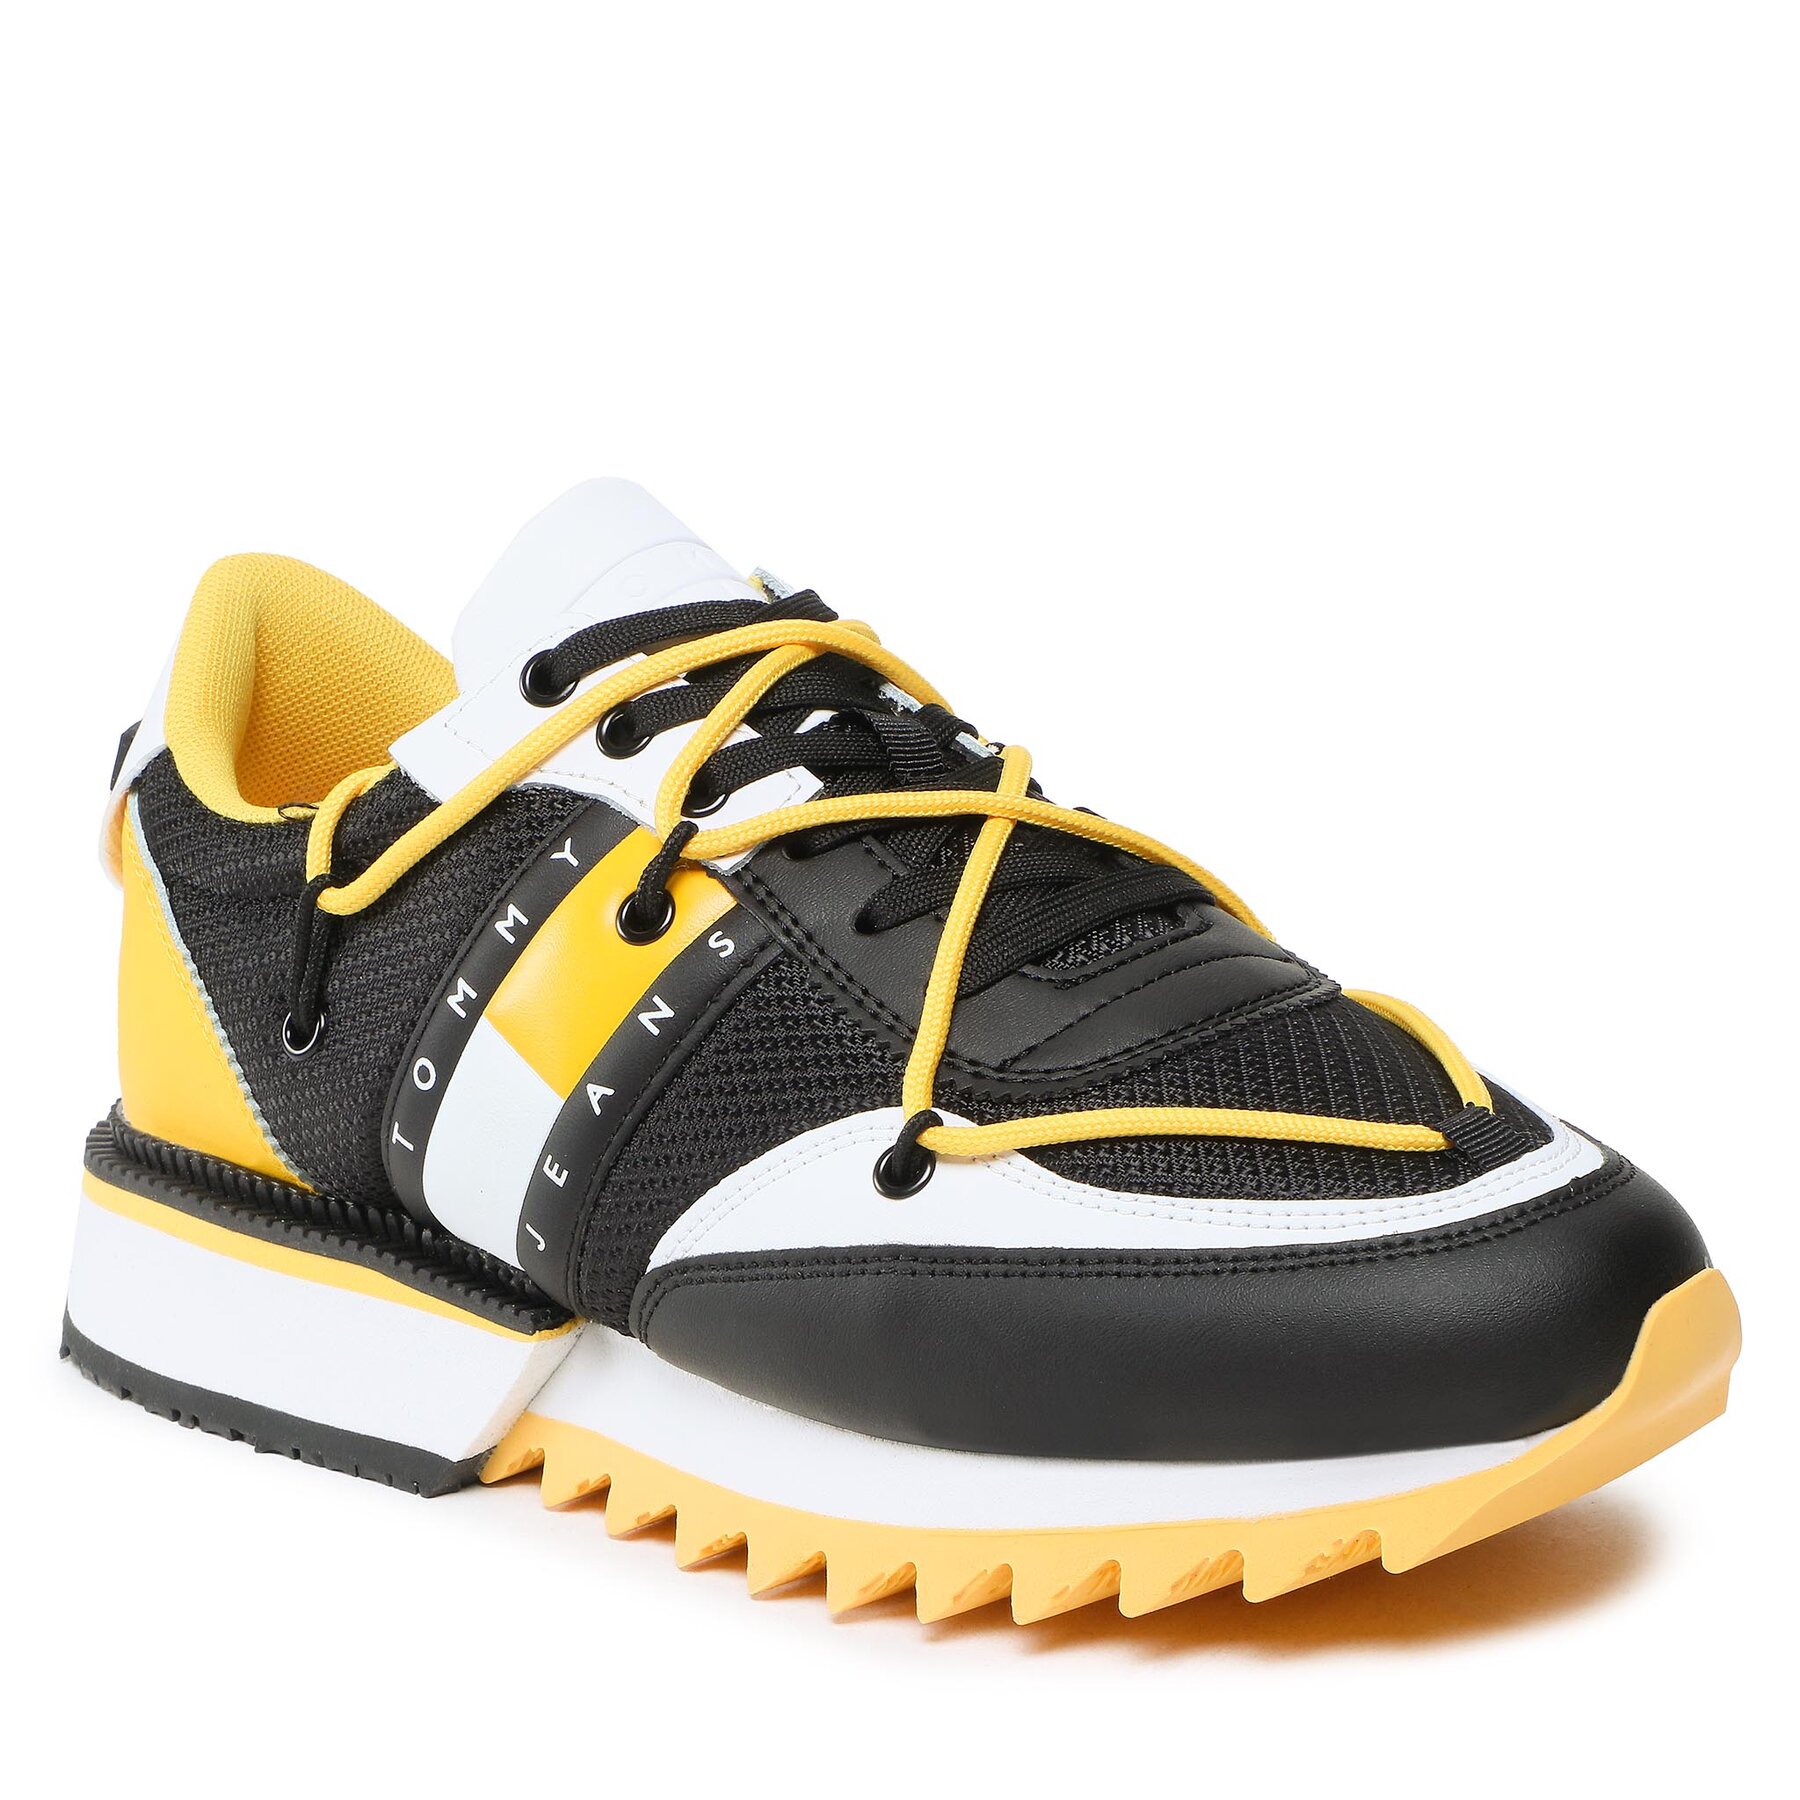 Sneakers Tommy Jeans Outdoor Cleated EM0EM01138 Warm Yellow ZFM Cleated imagine 2022 reducere